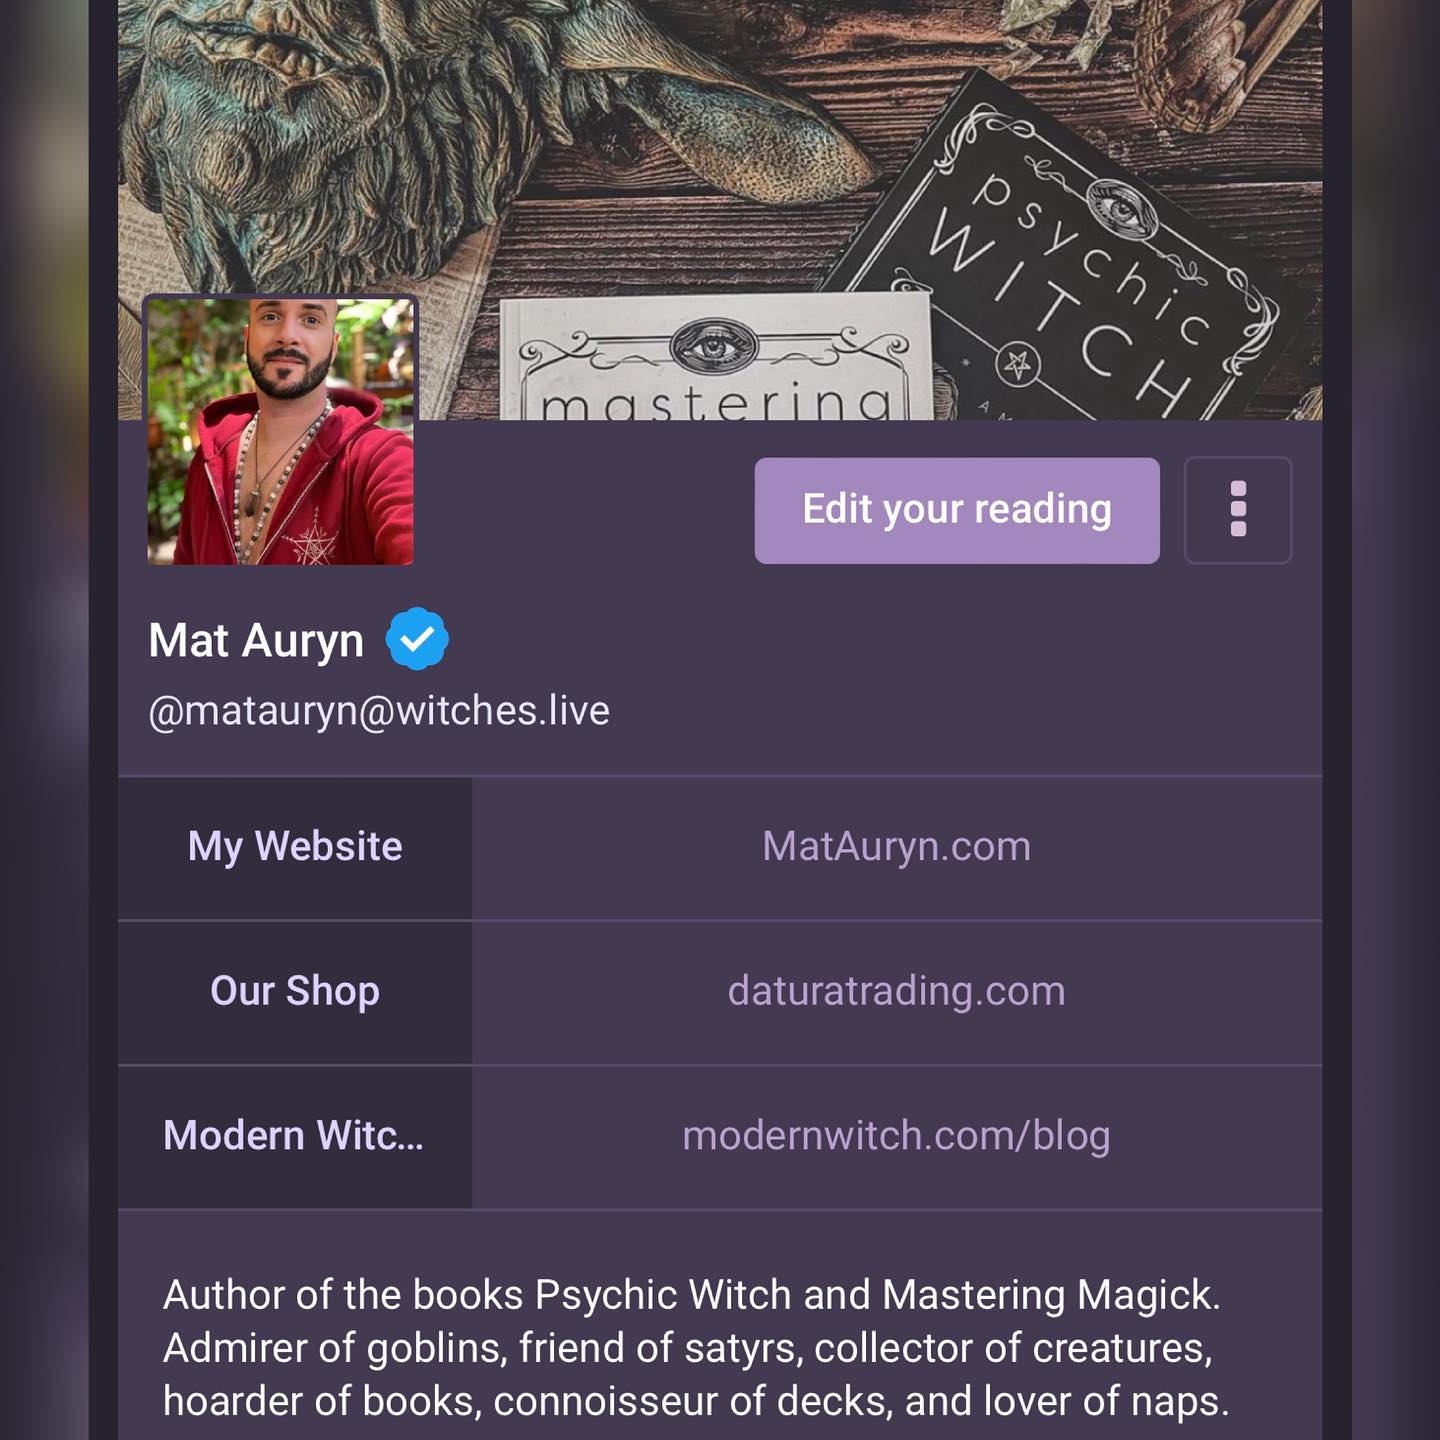 Do you have a Mastodon account? I just created one. Come connect with me over there. witches.live is a great server if you’re looking for witchy folks to social network with. 🔮